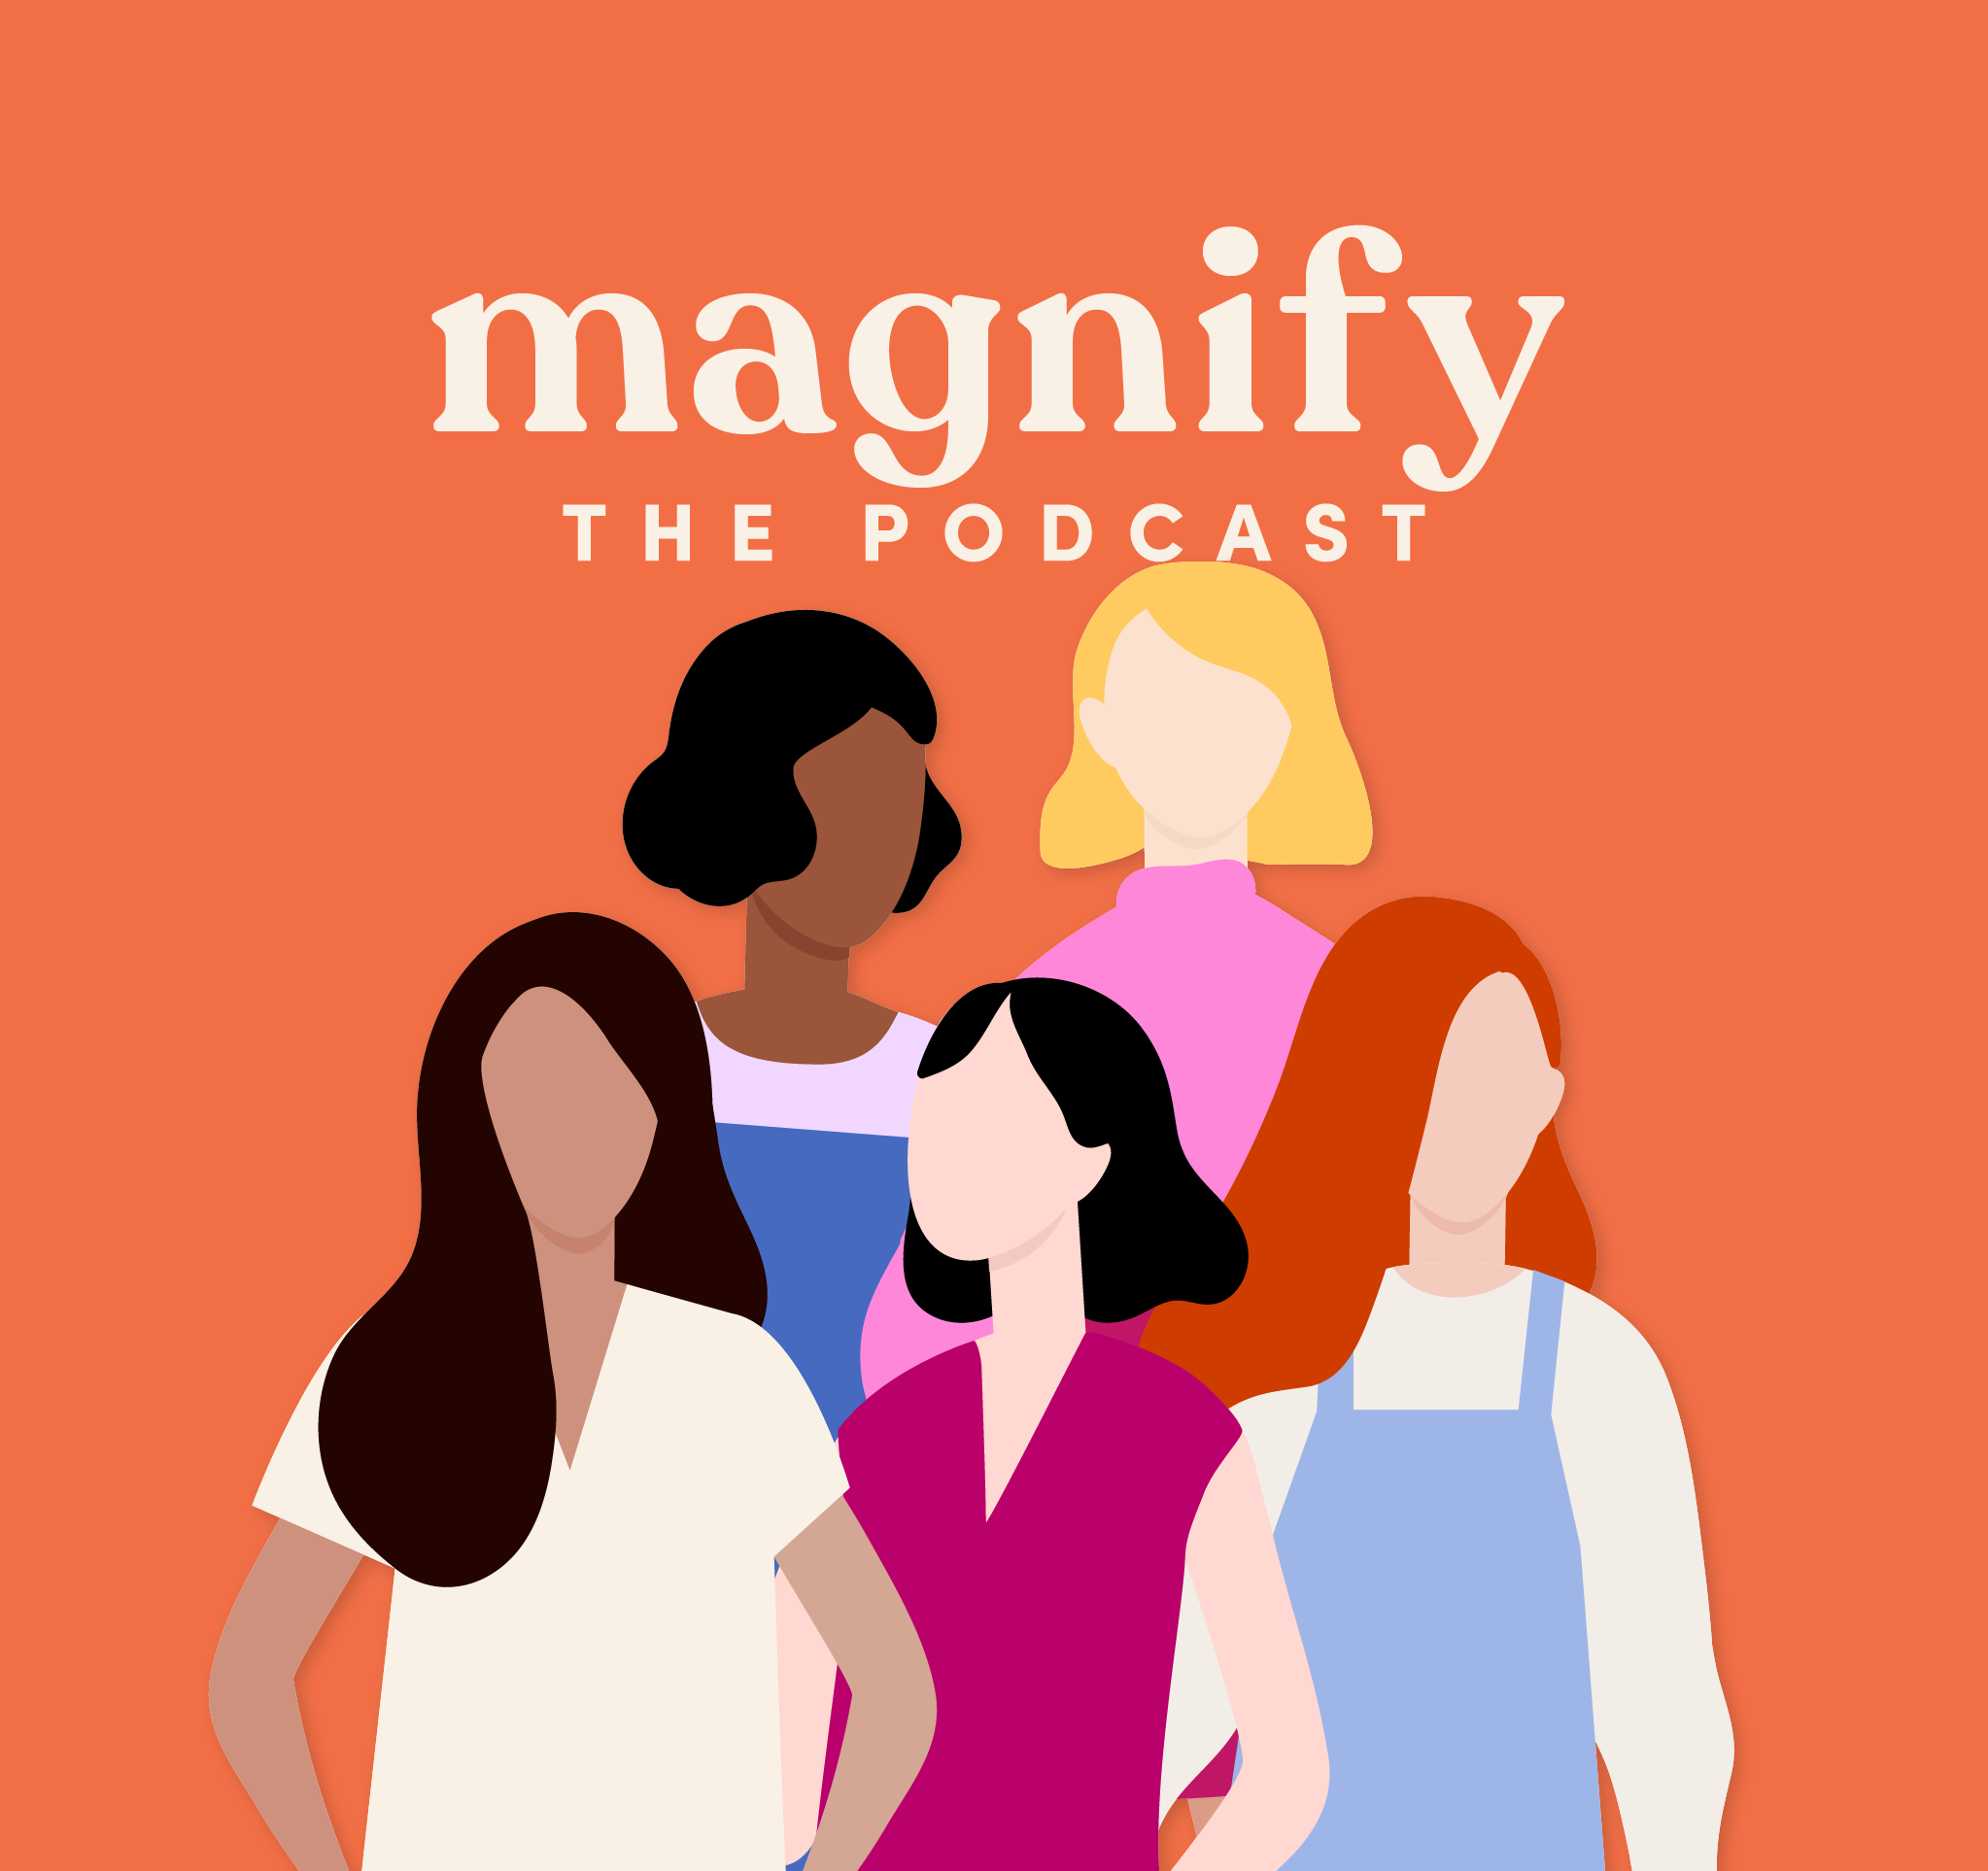 Introducing Magnify